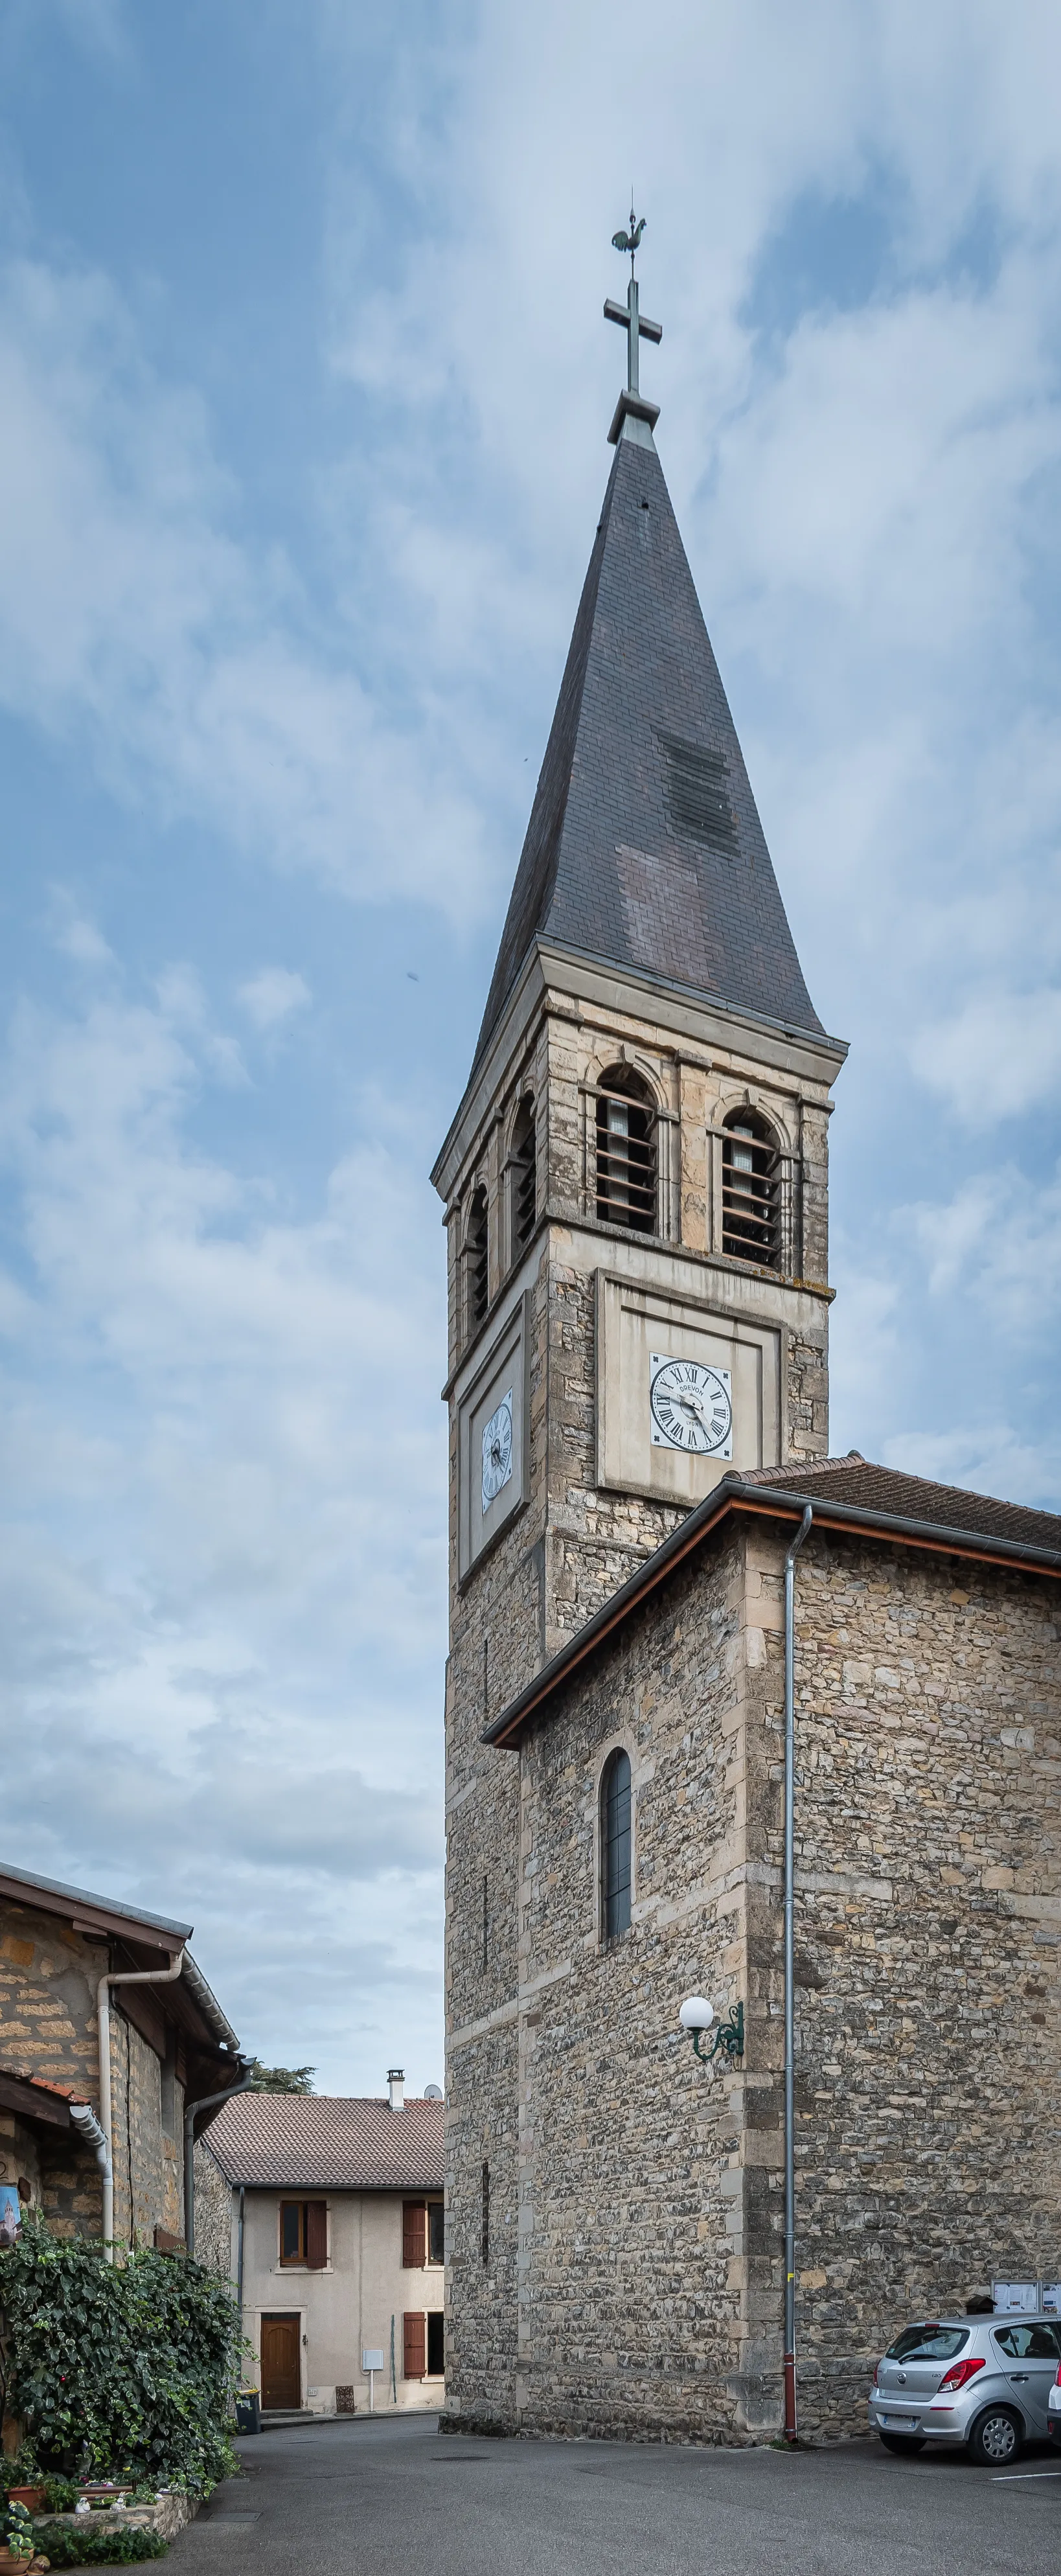 Photo showing: Bell tower of the Mary Magdalene church in Vaulx-Milieu, Isère, France